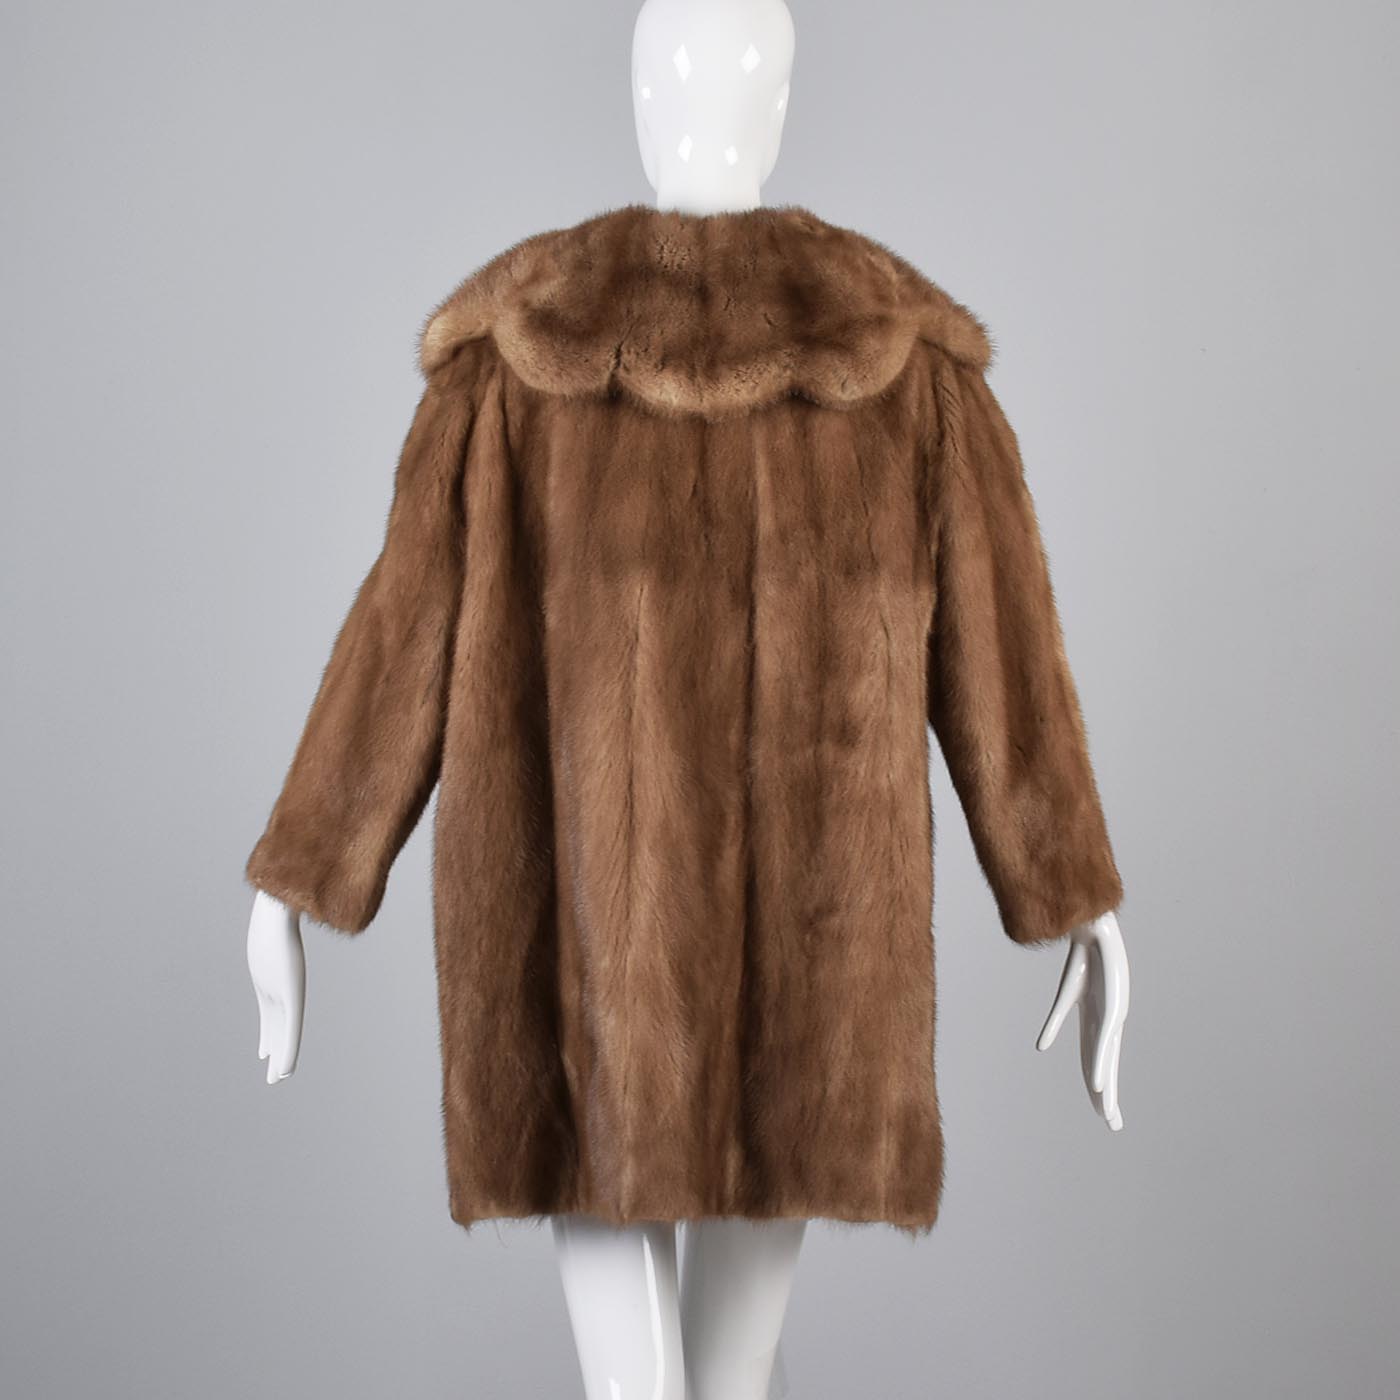 1950s Mink Coat with Dramatic Scalloped Collar